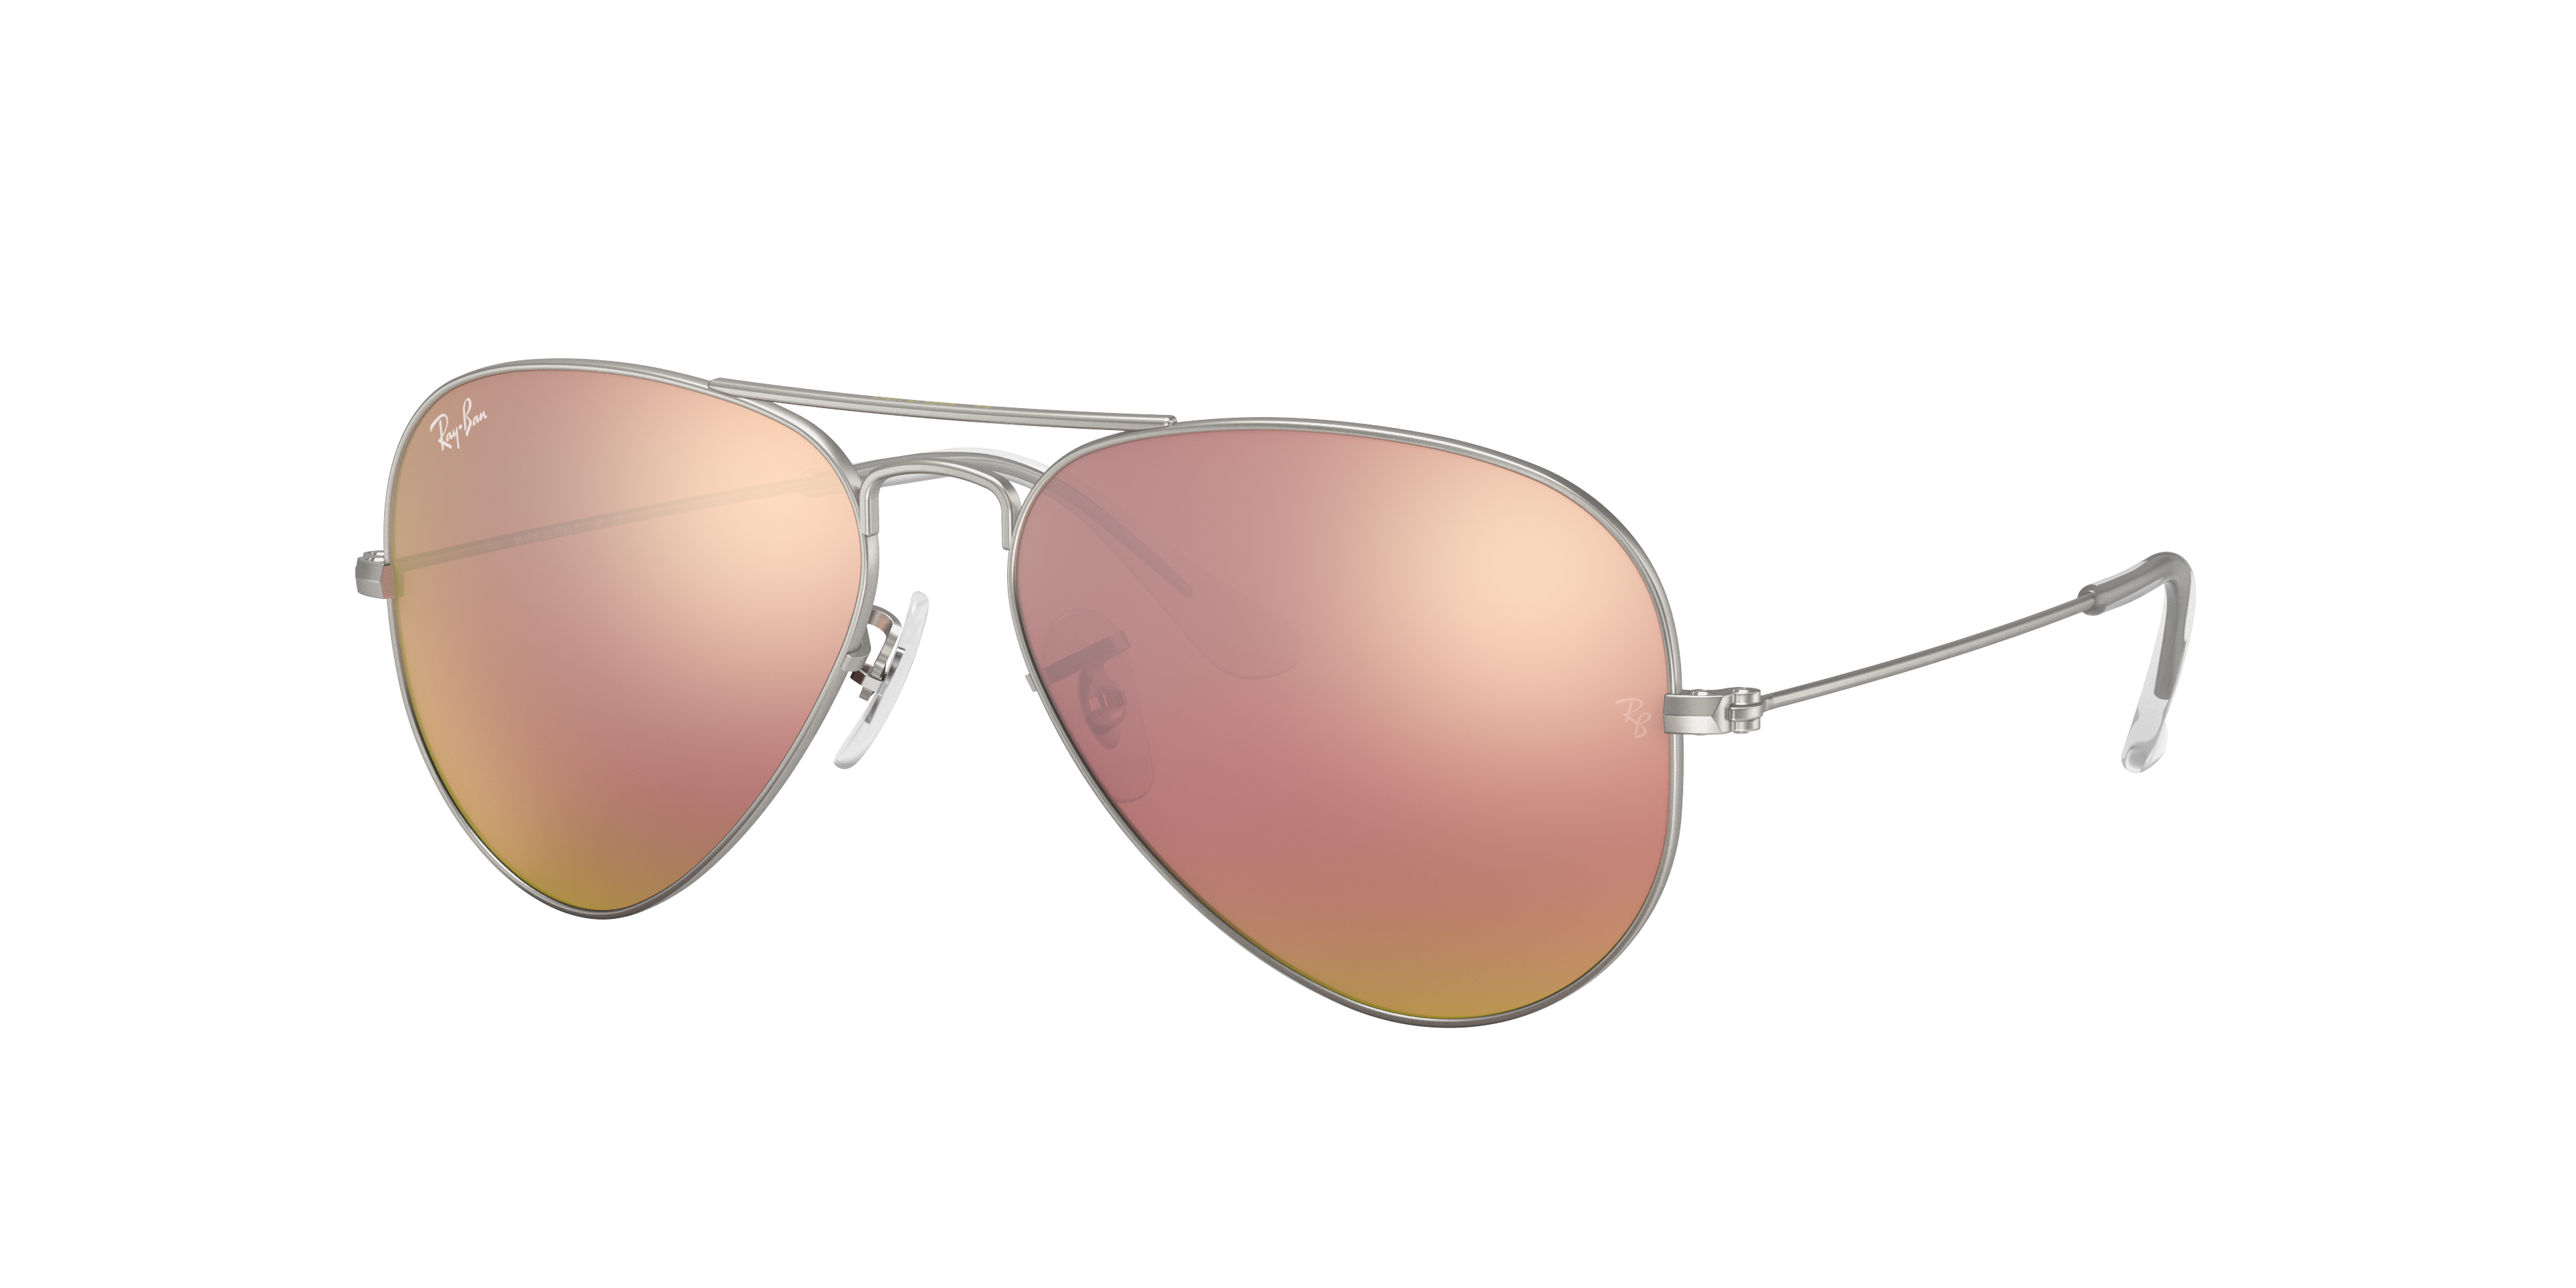 ray ban rb3025 silver mirror